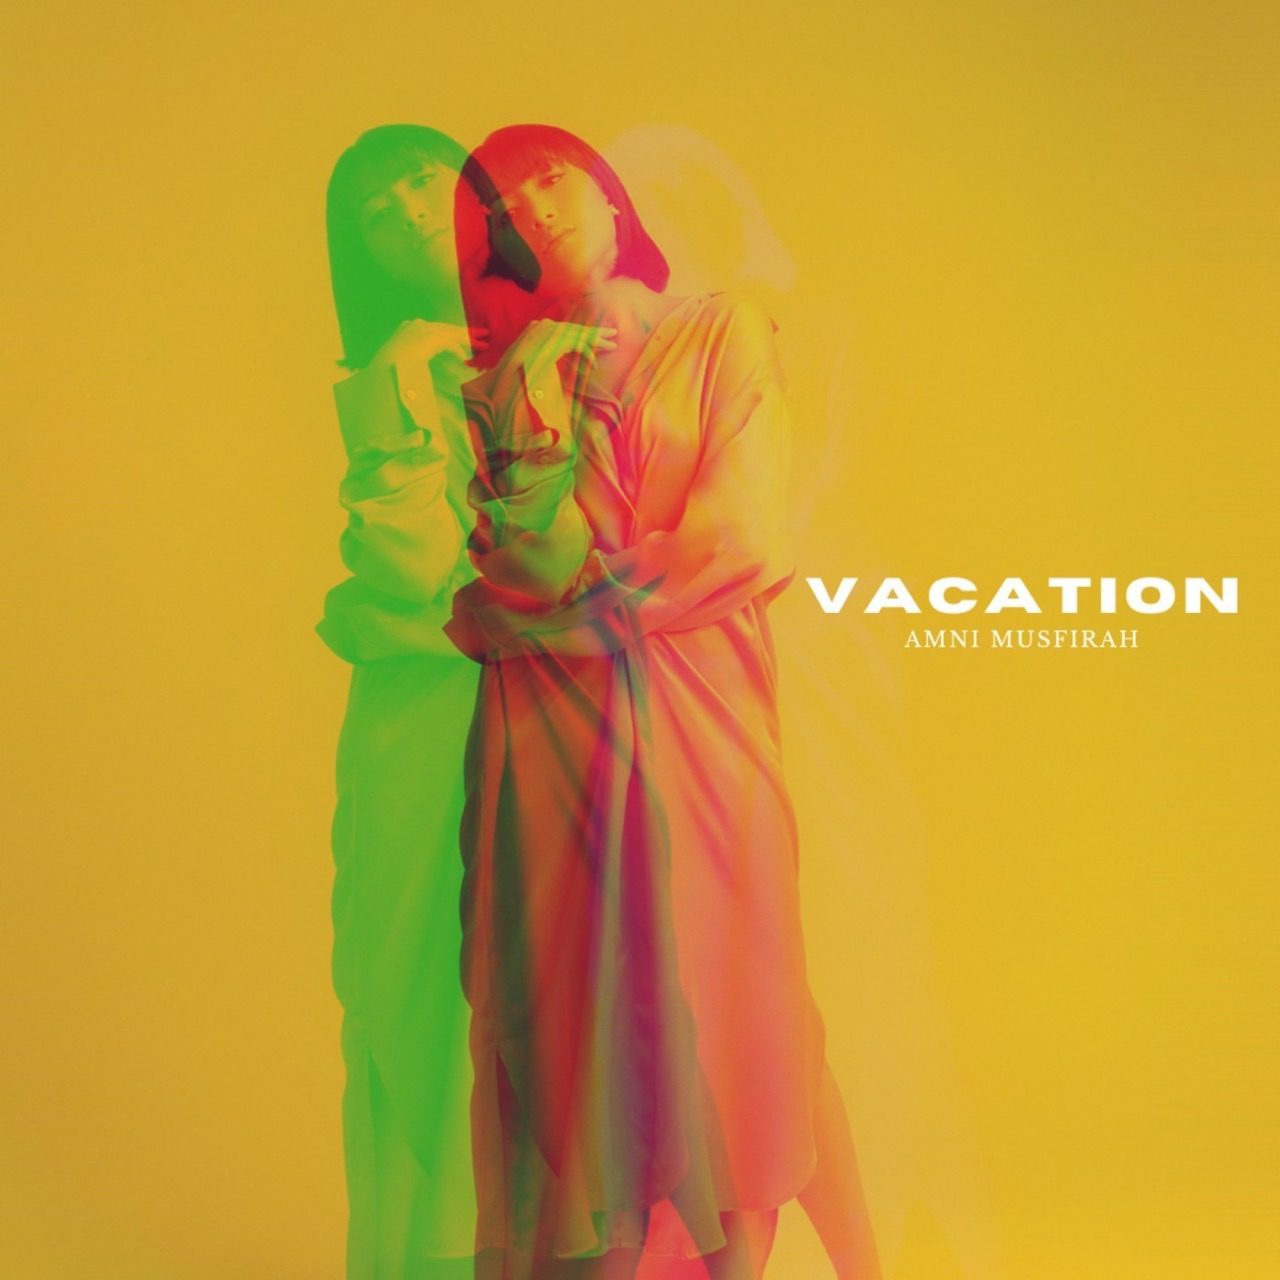 Singer-Songwriter & Producer Amni Musfirah Returns With A New Single – “Vacation”